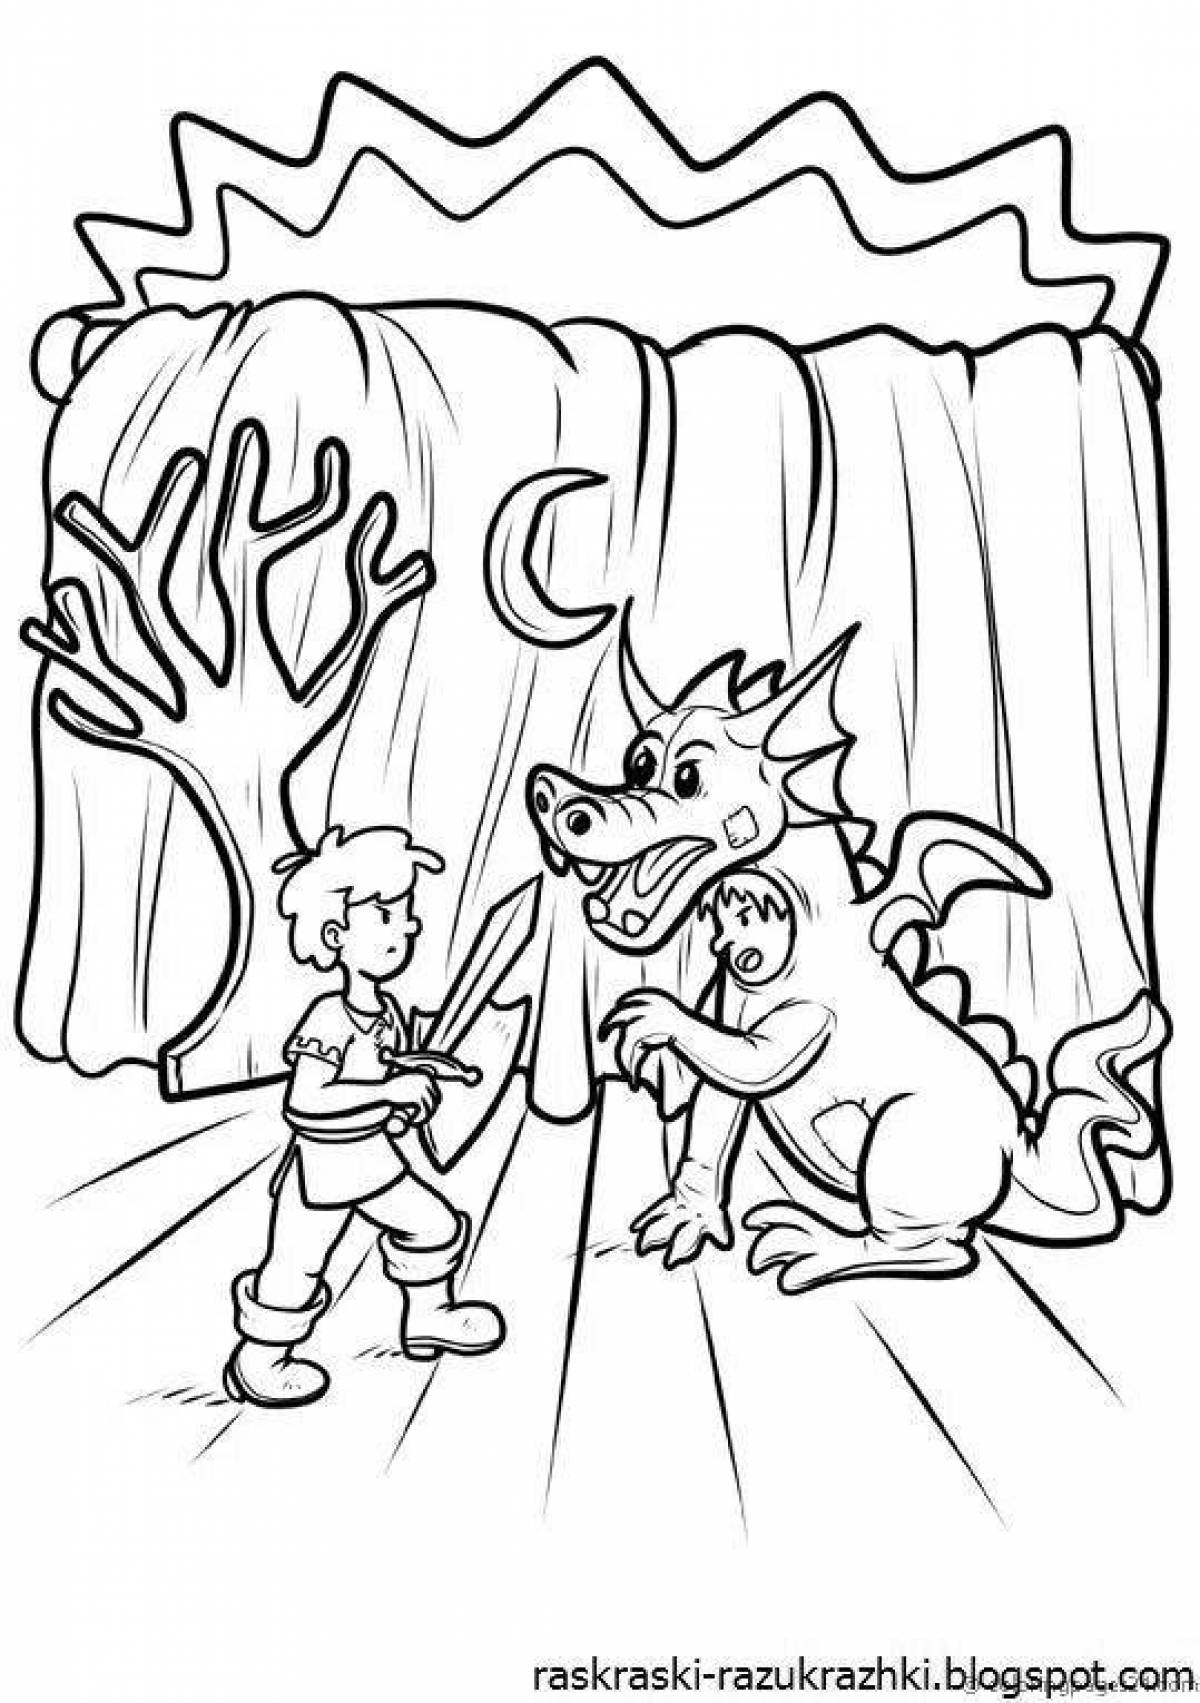 Coloring page sparkling puppet theater